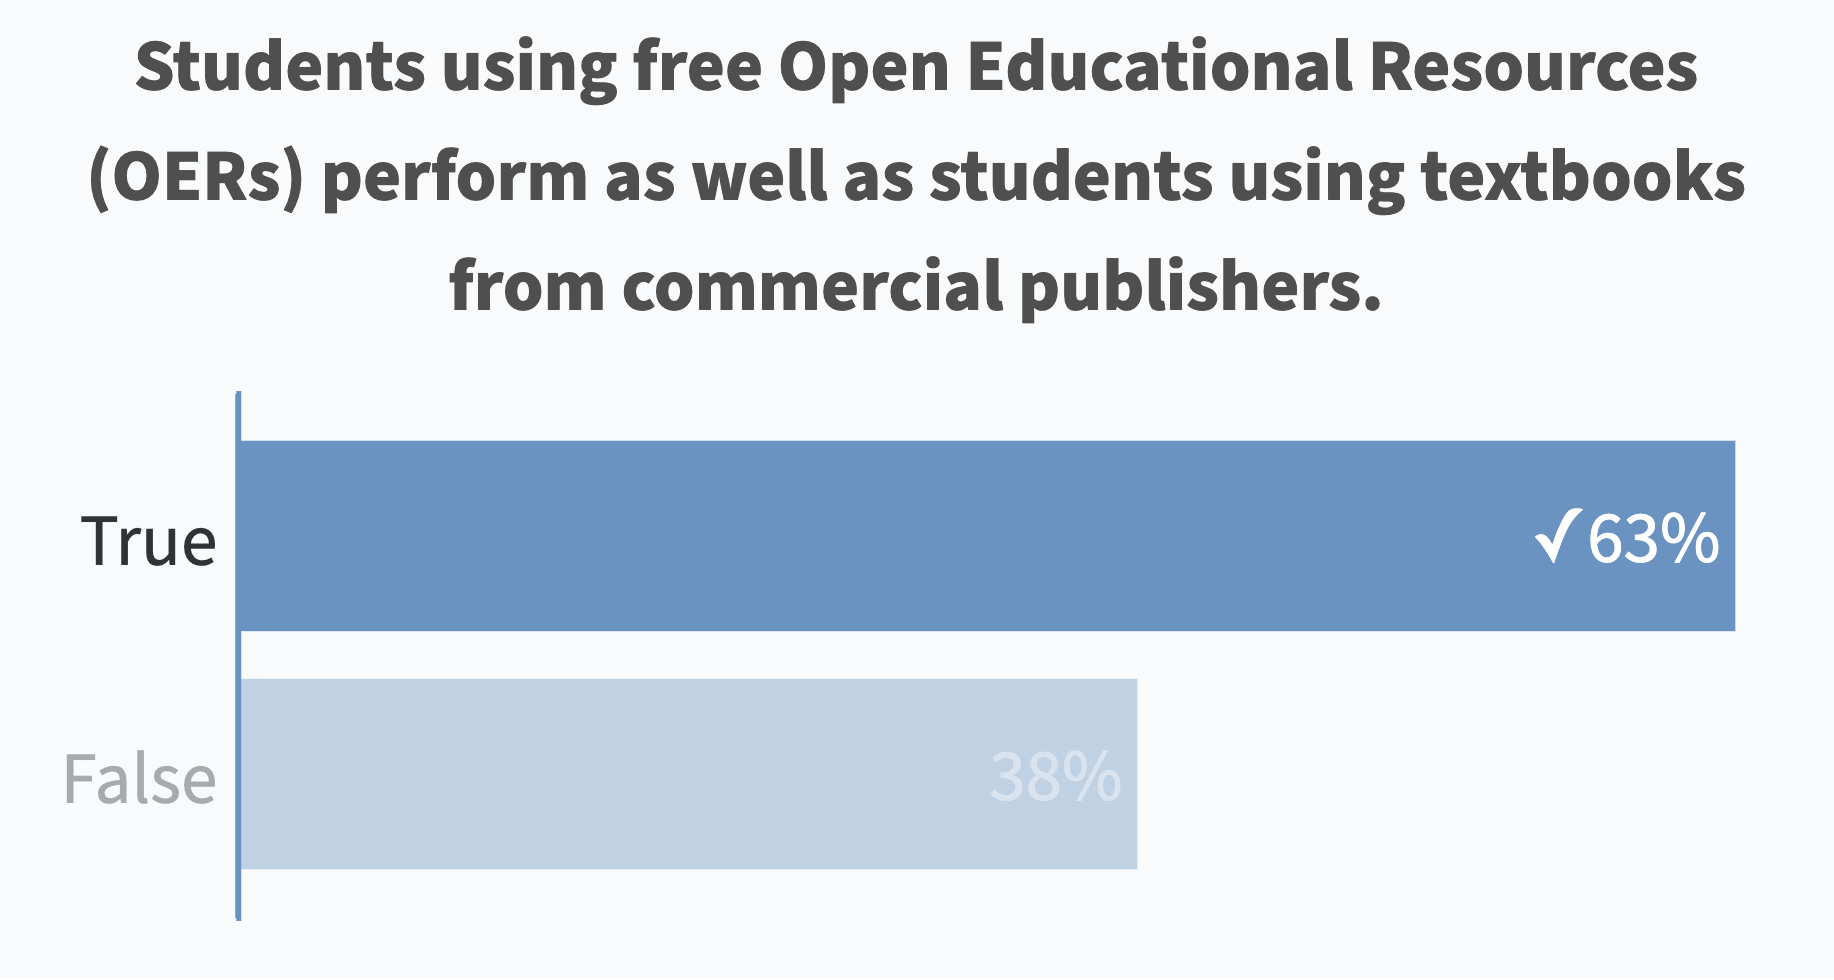 Students using free Open Educational Resources (OERs) perform as well as students using textbooks from commercial publishers. (True: 63% correct)